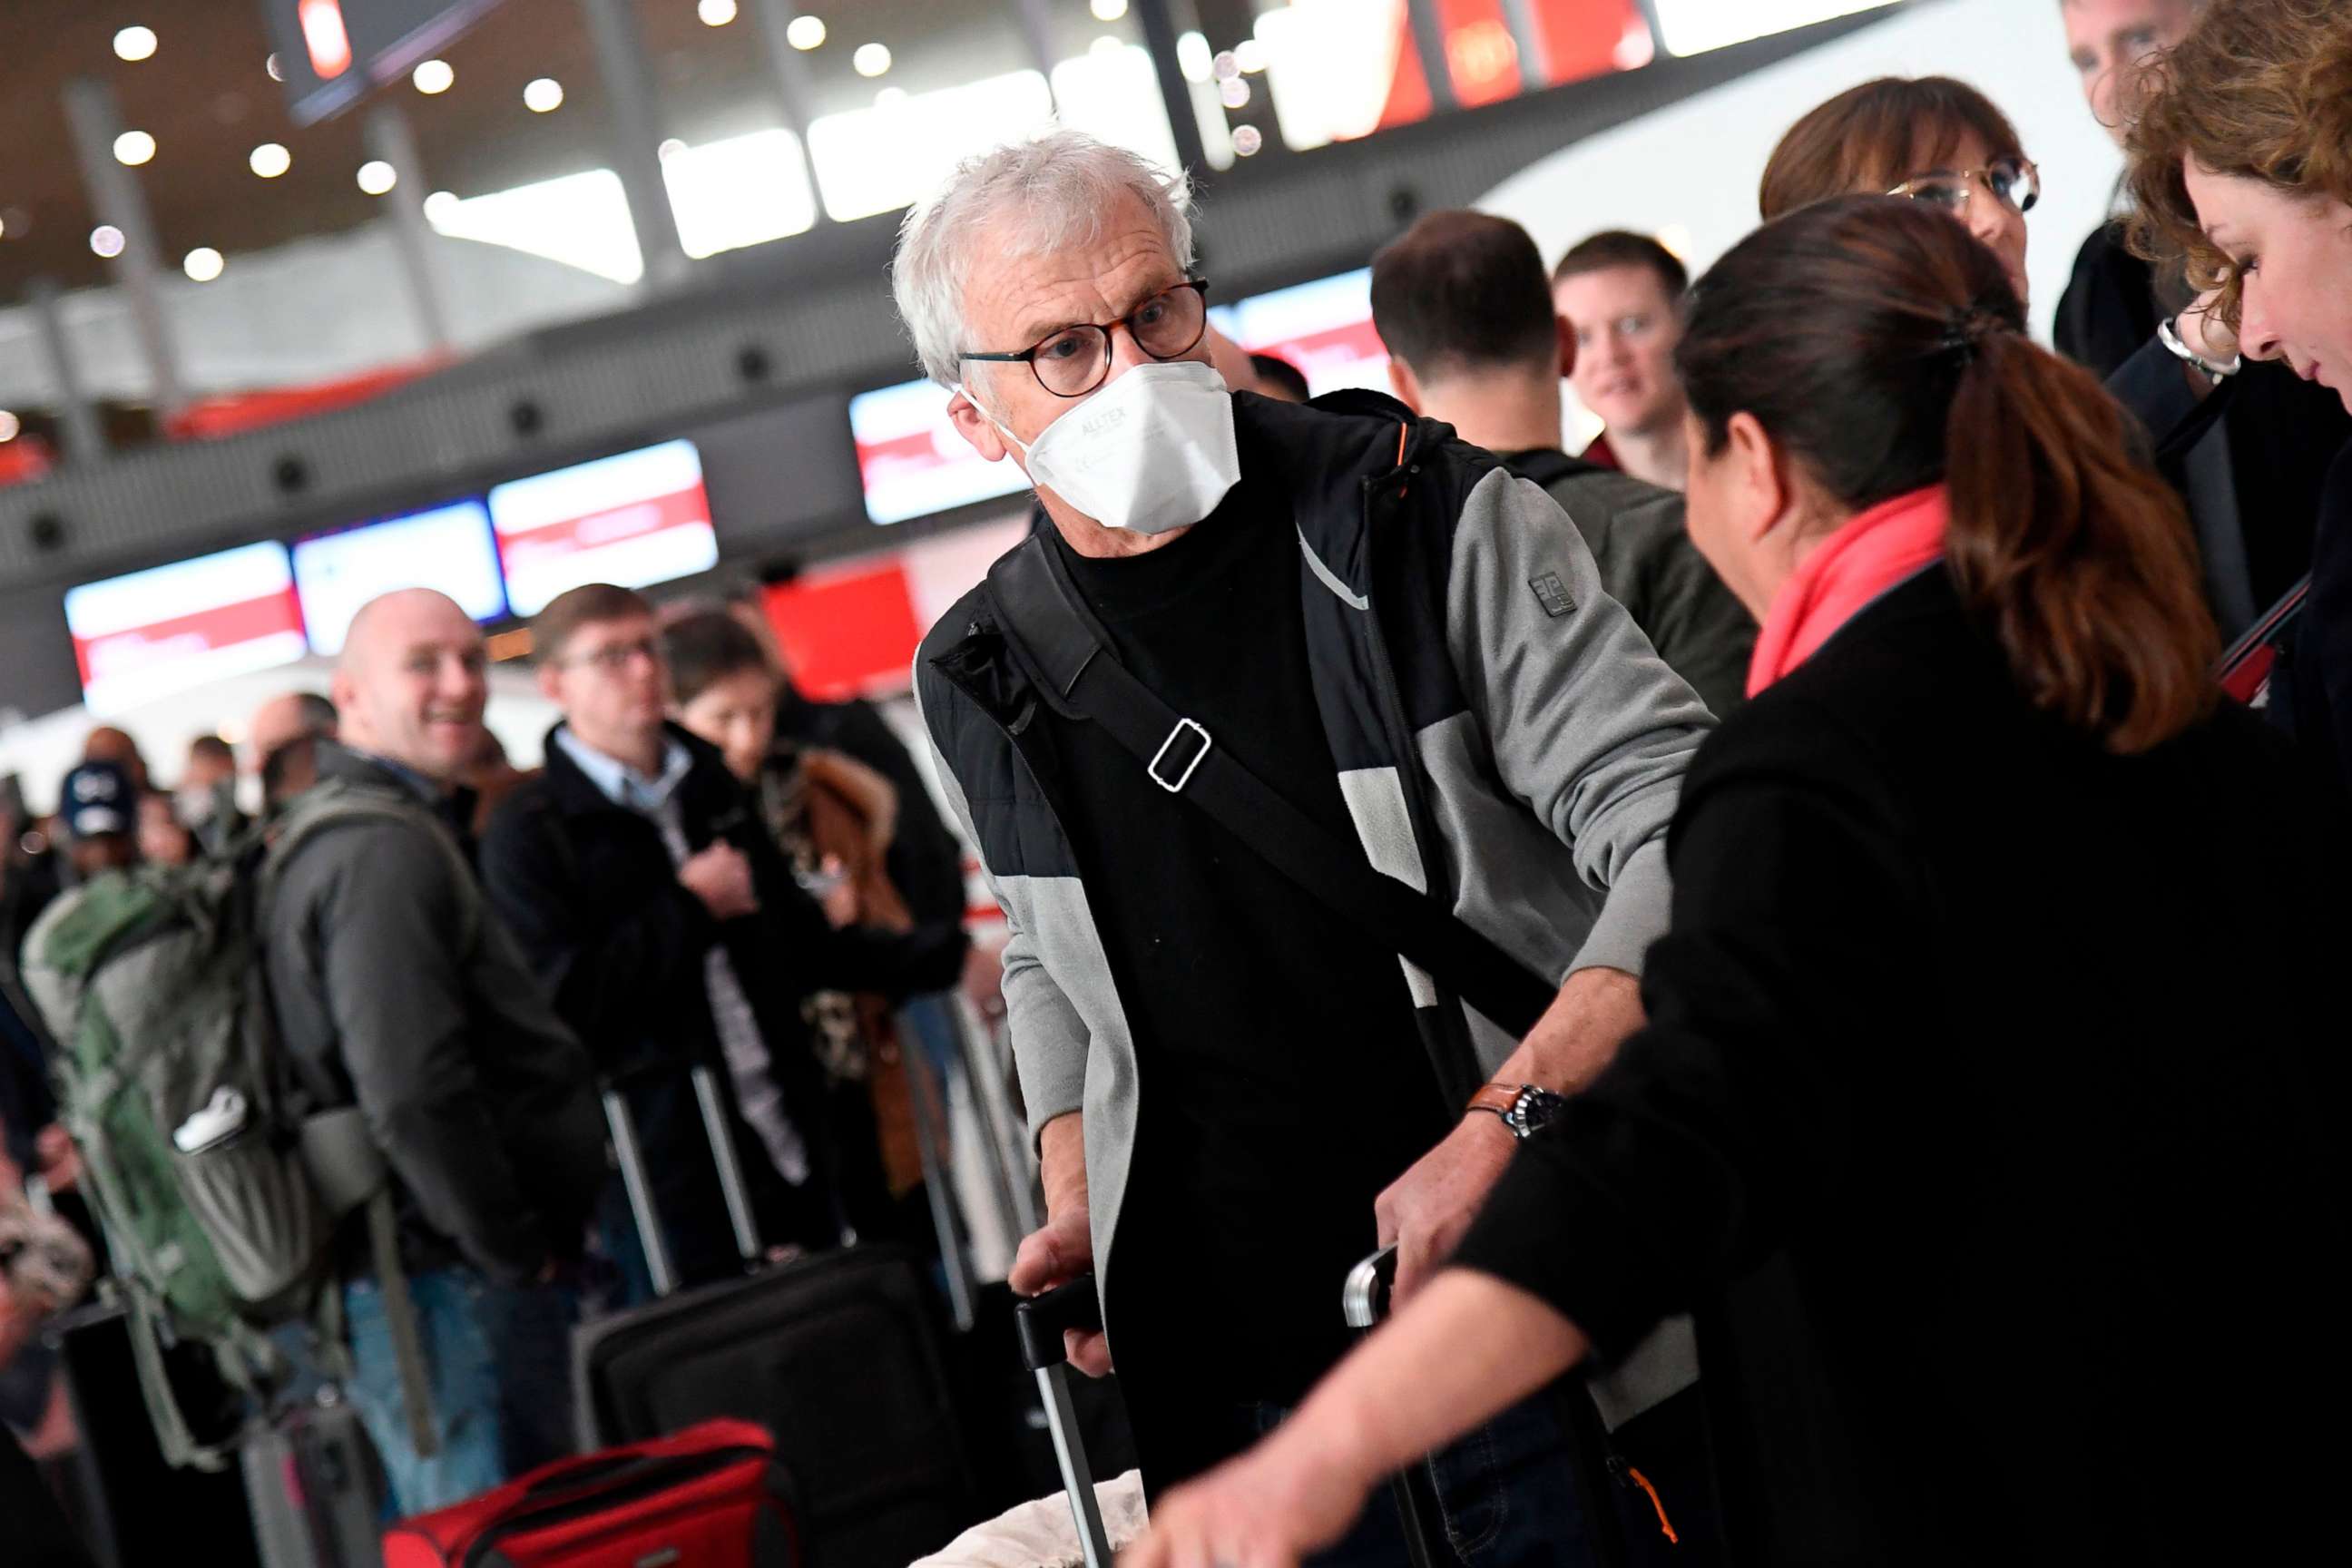 PHOTO: Travelers wait in a check-in line at Paris-Charles-de-Gaulle airport after announcement of a 30-day ban on travel from Europe by President Trump, due to the COVID-19 spread in Roissy-en-France that caused confusion and concern, on March 12, 2020. 